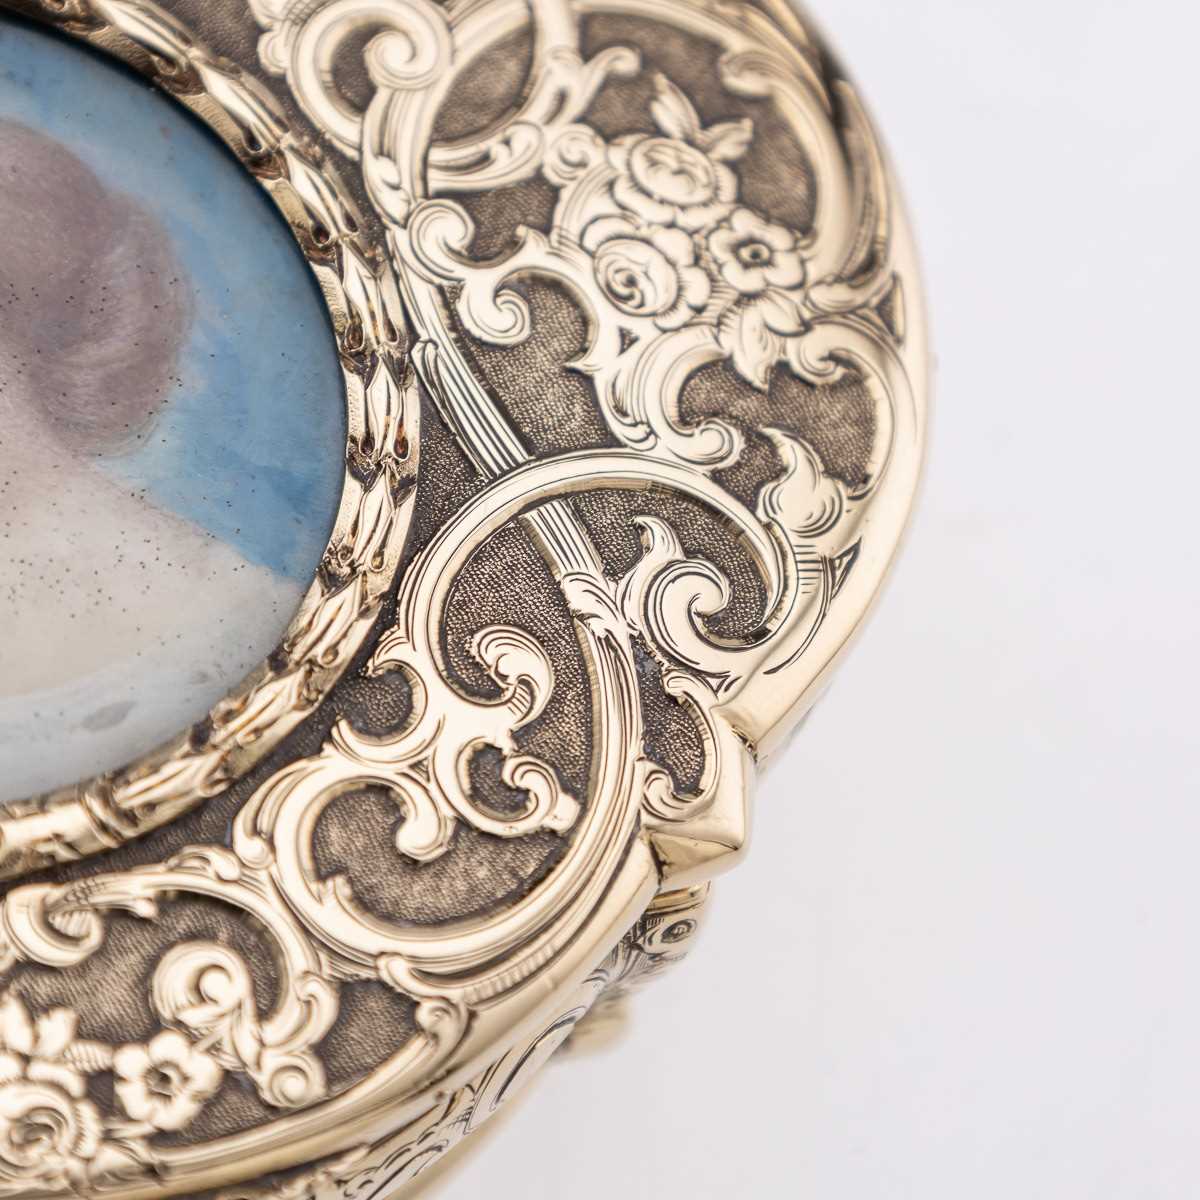 A FINE 19TH CENTURY 18CT GOLD ROYAL PRESENTATION SNUFF BOX WITH PORTRAIT OF NAPOELON III - Image 6 of 18